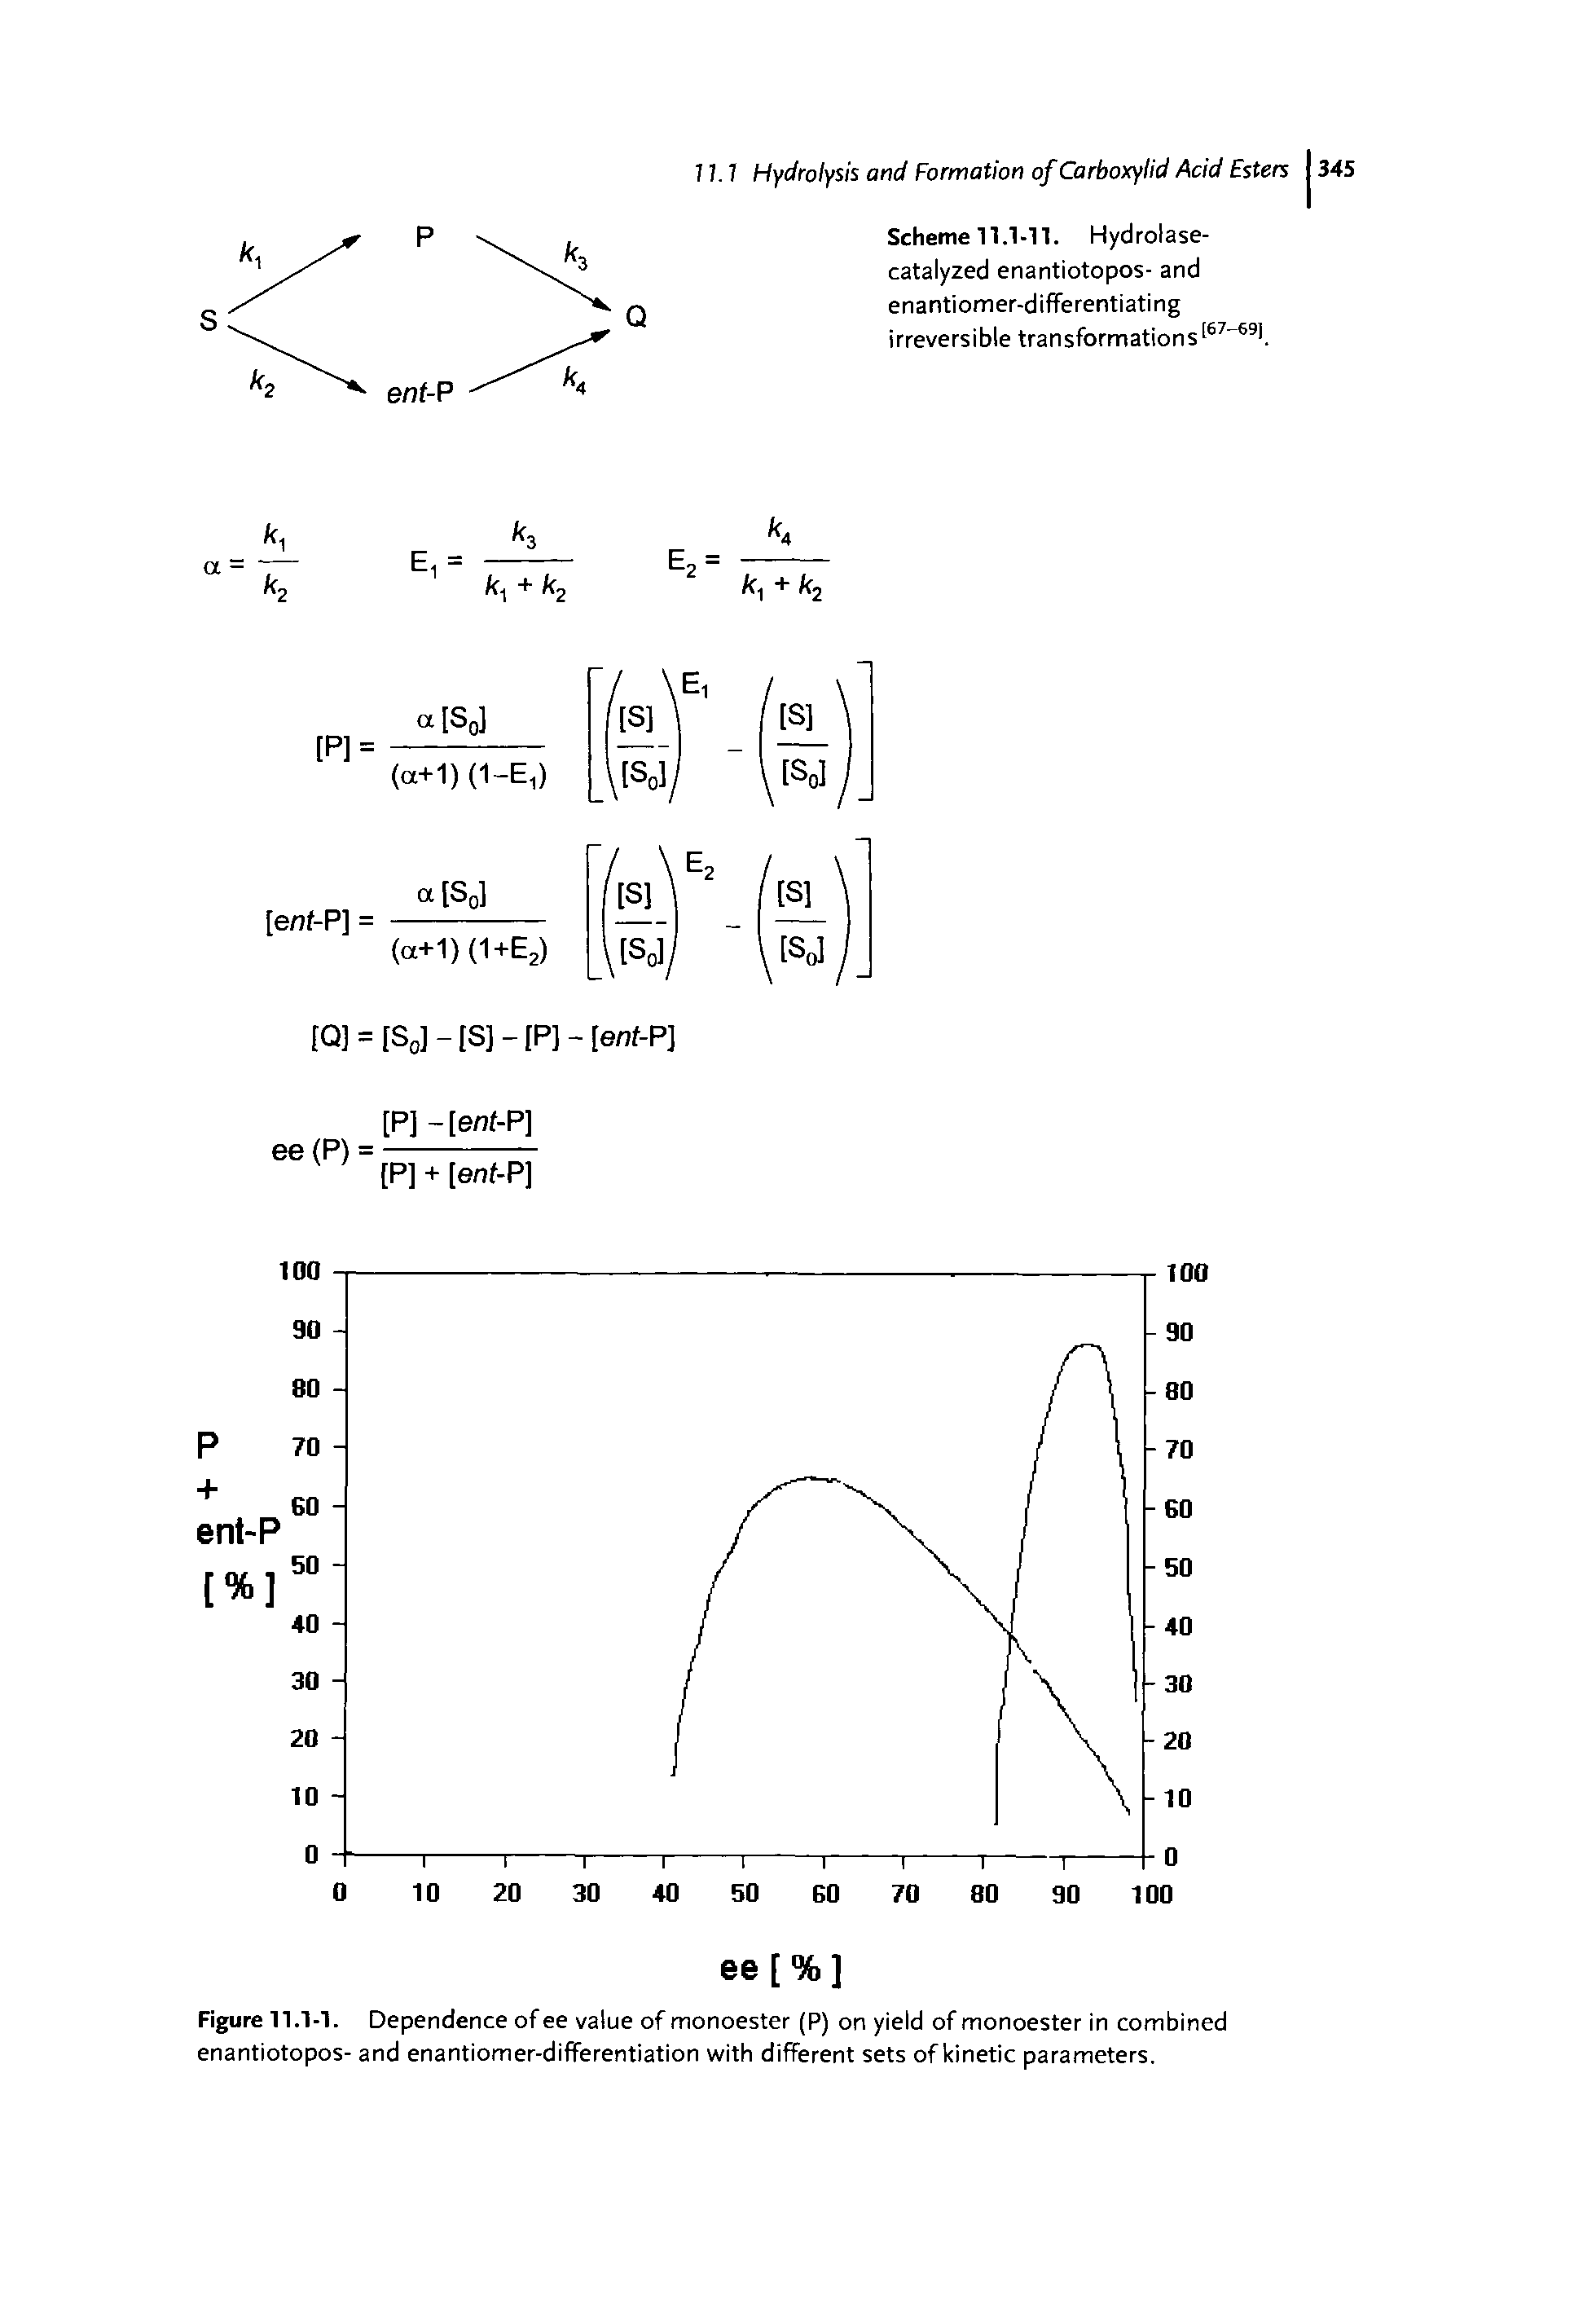 Figure 11.1-1. Dependence of ee value of monoester (P) on yield of monoester in combined enantiotopos- and enantiomer-differentiation with different sets of kinetic parameters.